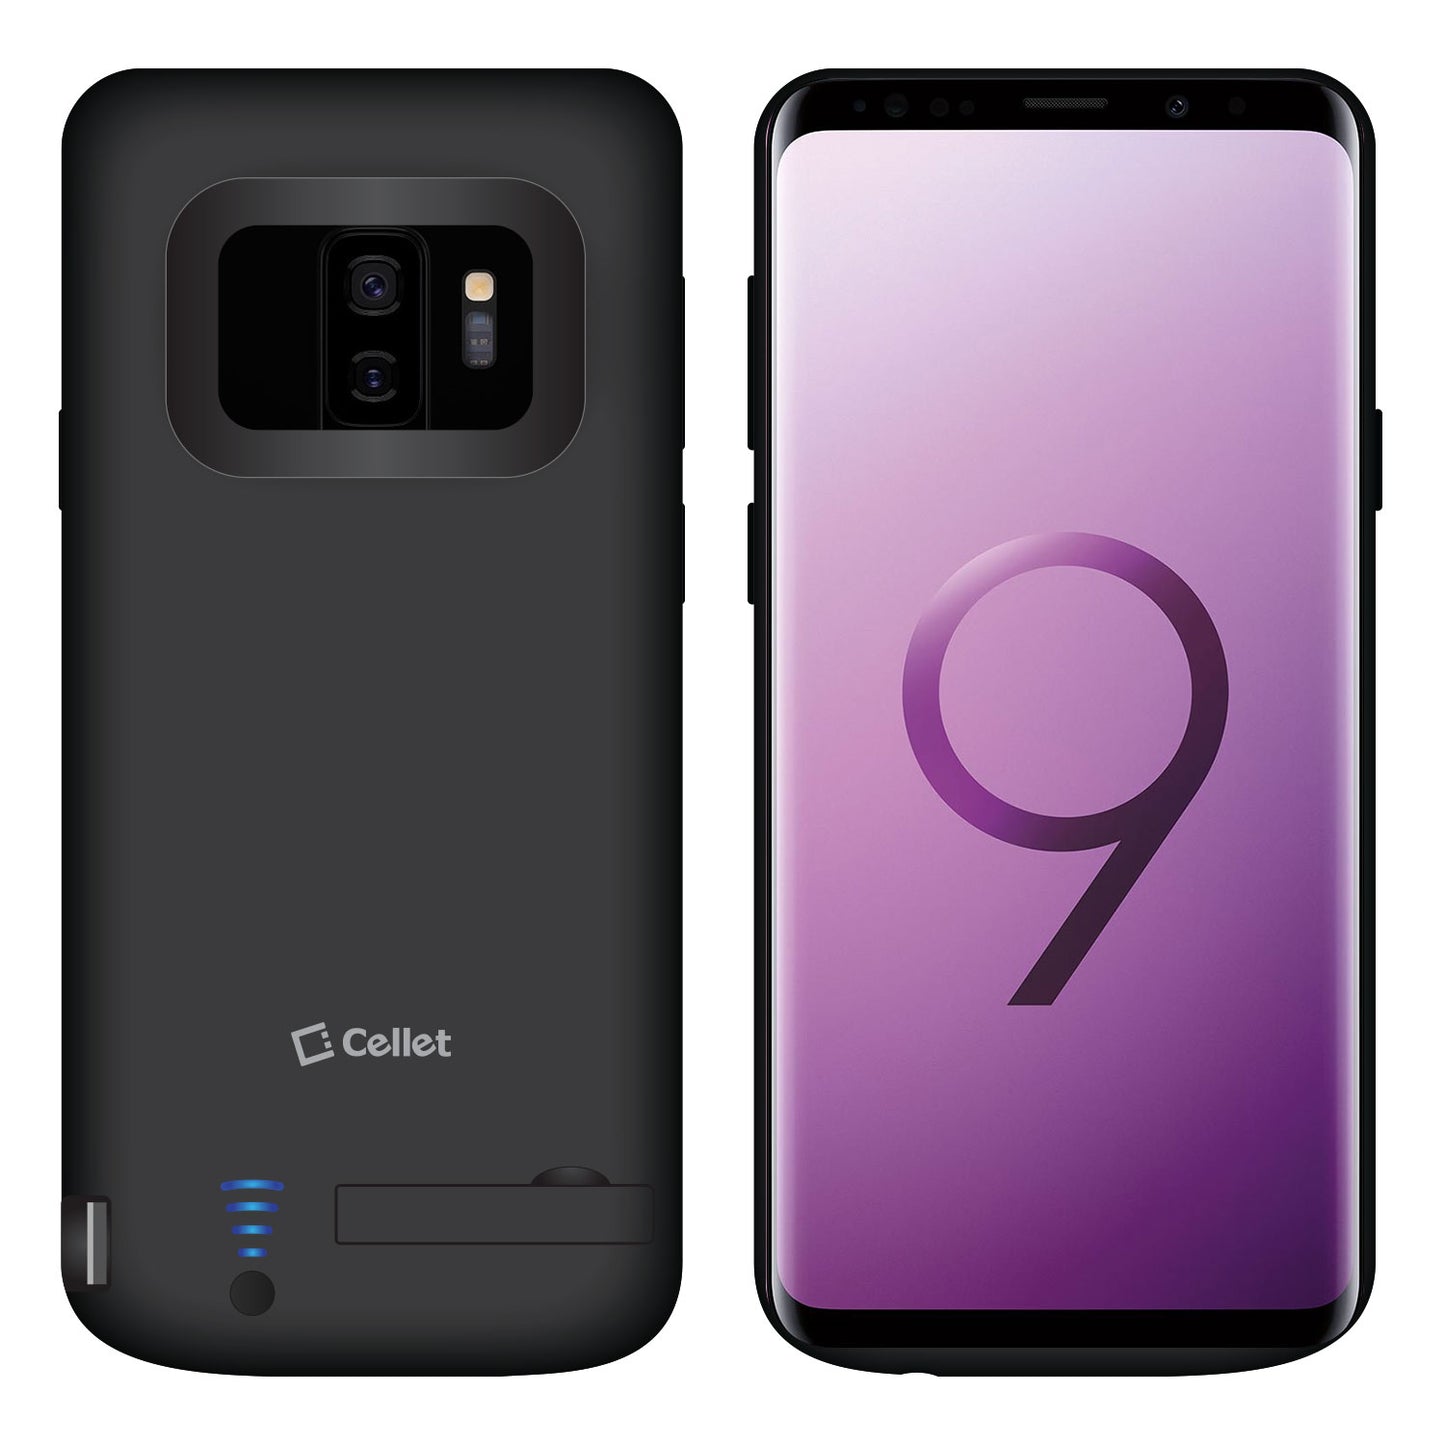 Battery Case for Samsung Galaxy S9+, Rechargeable Power Case for Samsung Galaxy S9 Plus